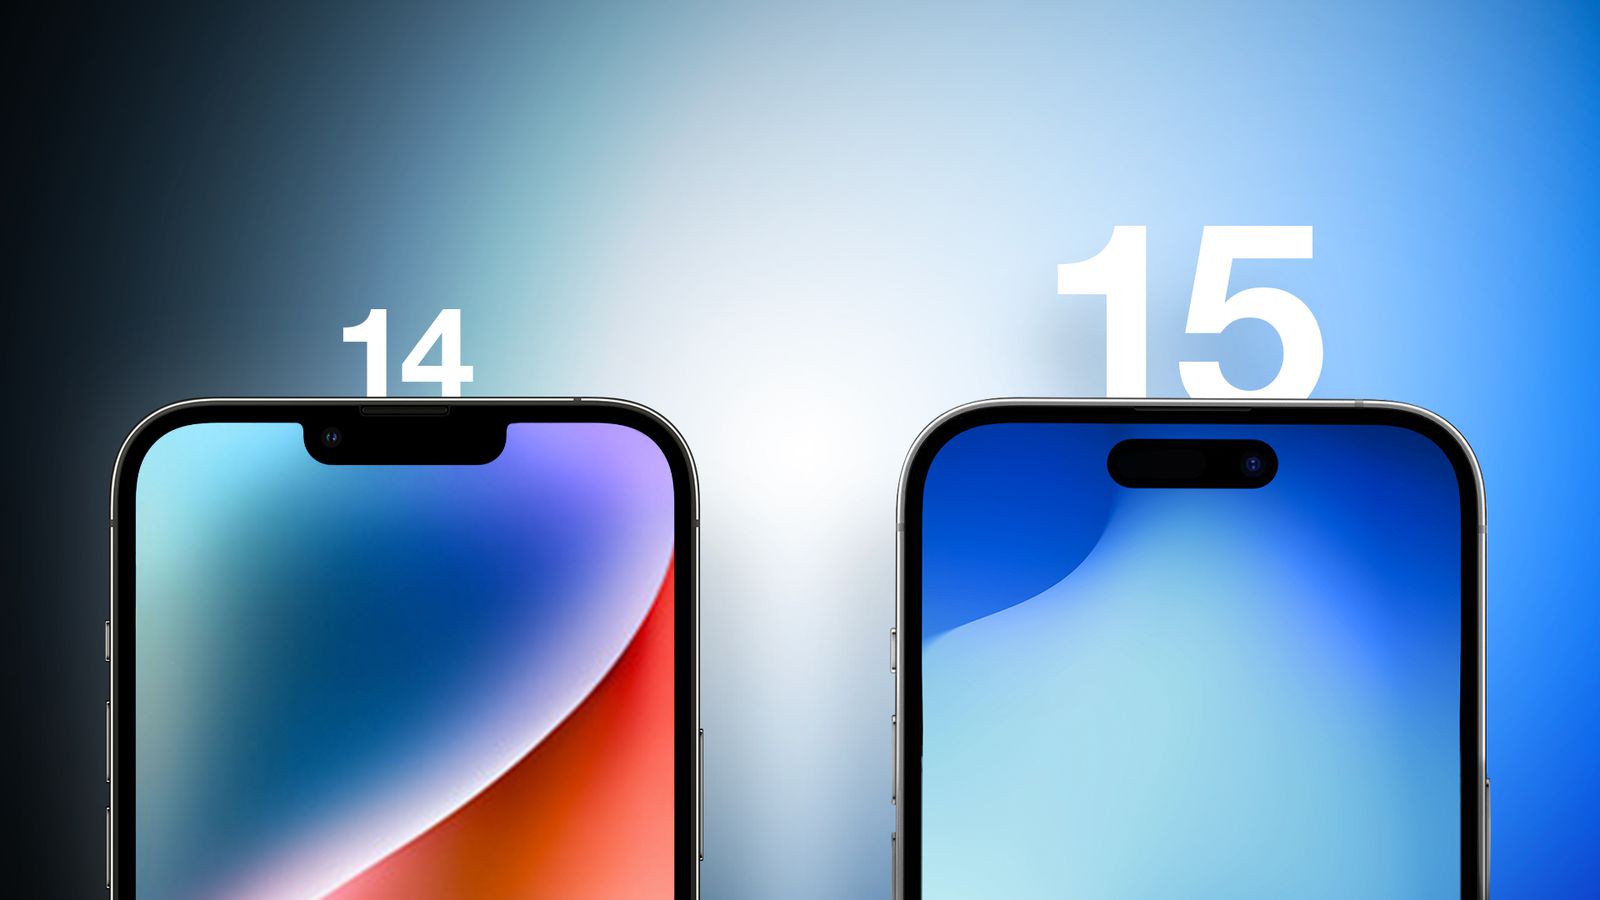 iPhone 14 vs iPhone 15: What are the differences?